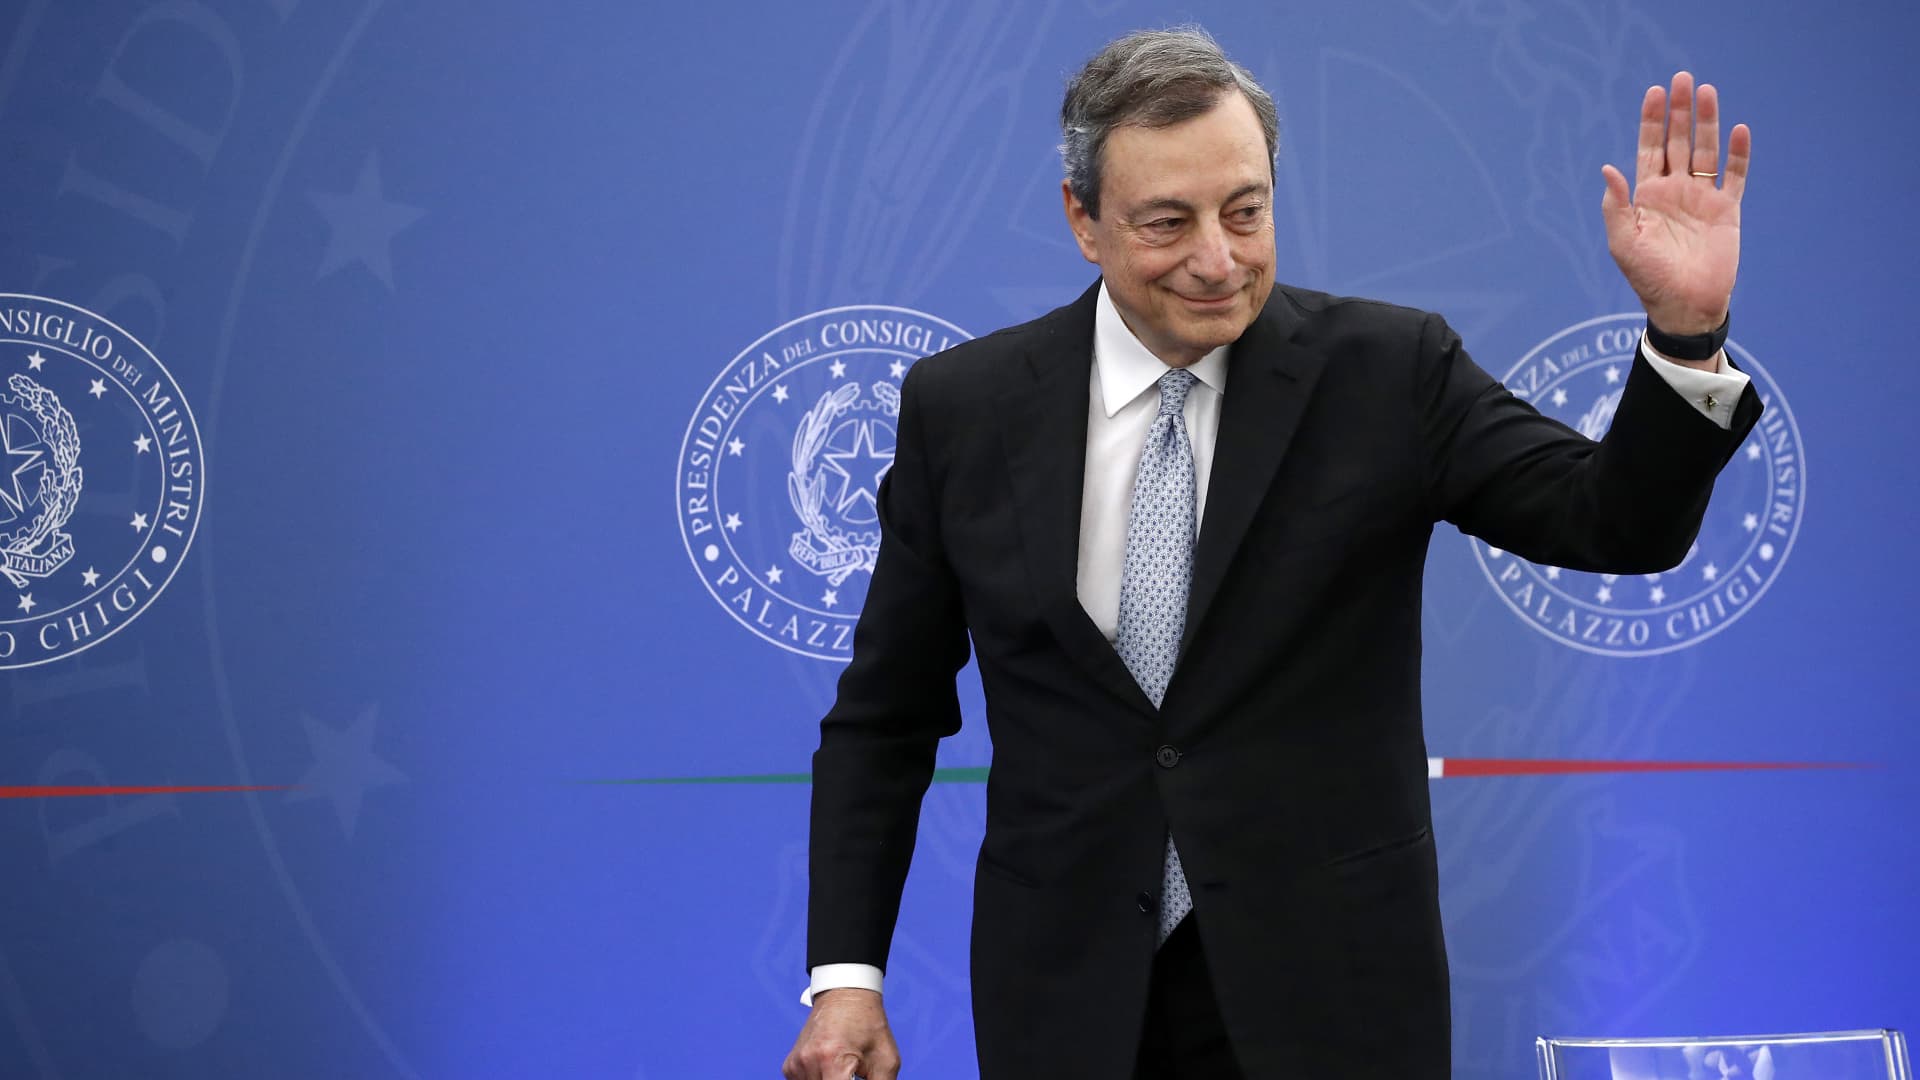 Italian PM Mario Draghi to resign after failing to revive his coalition government